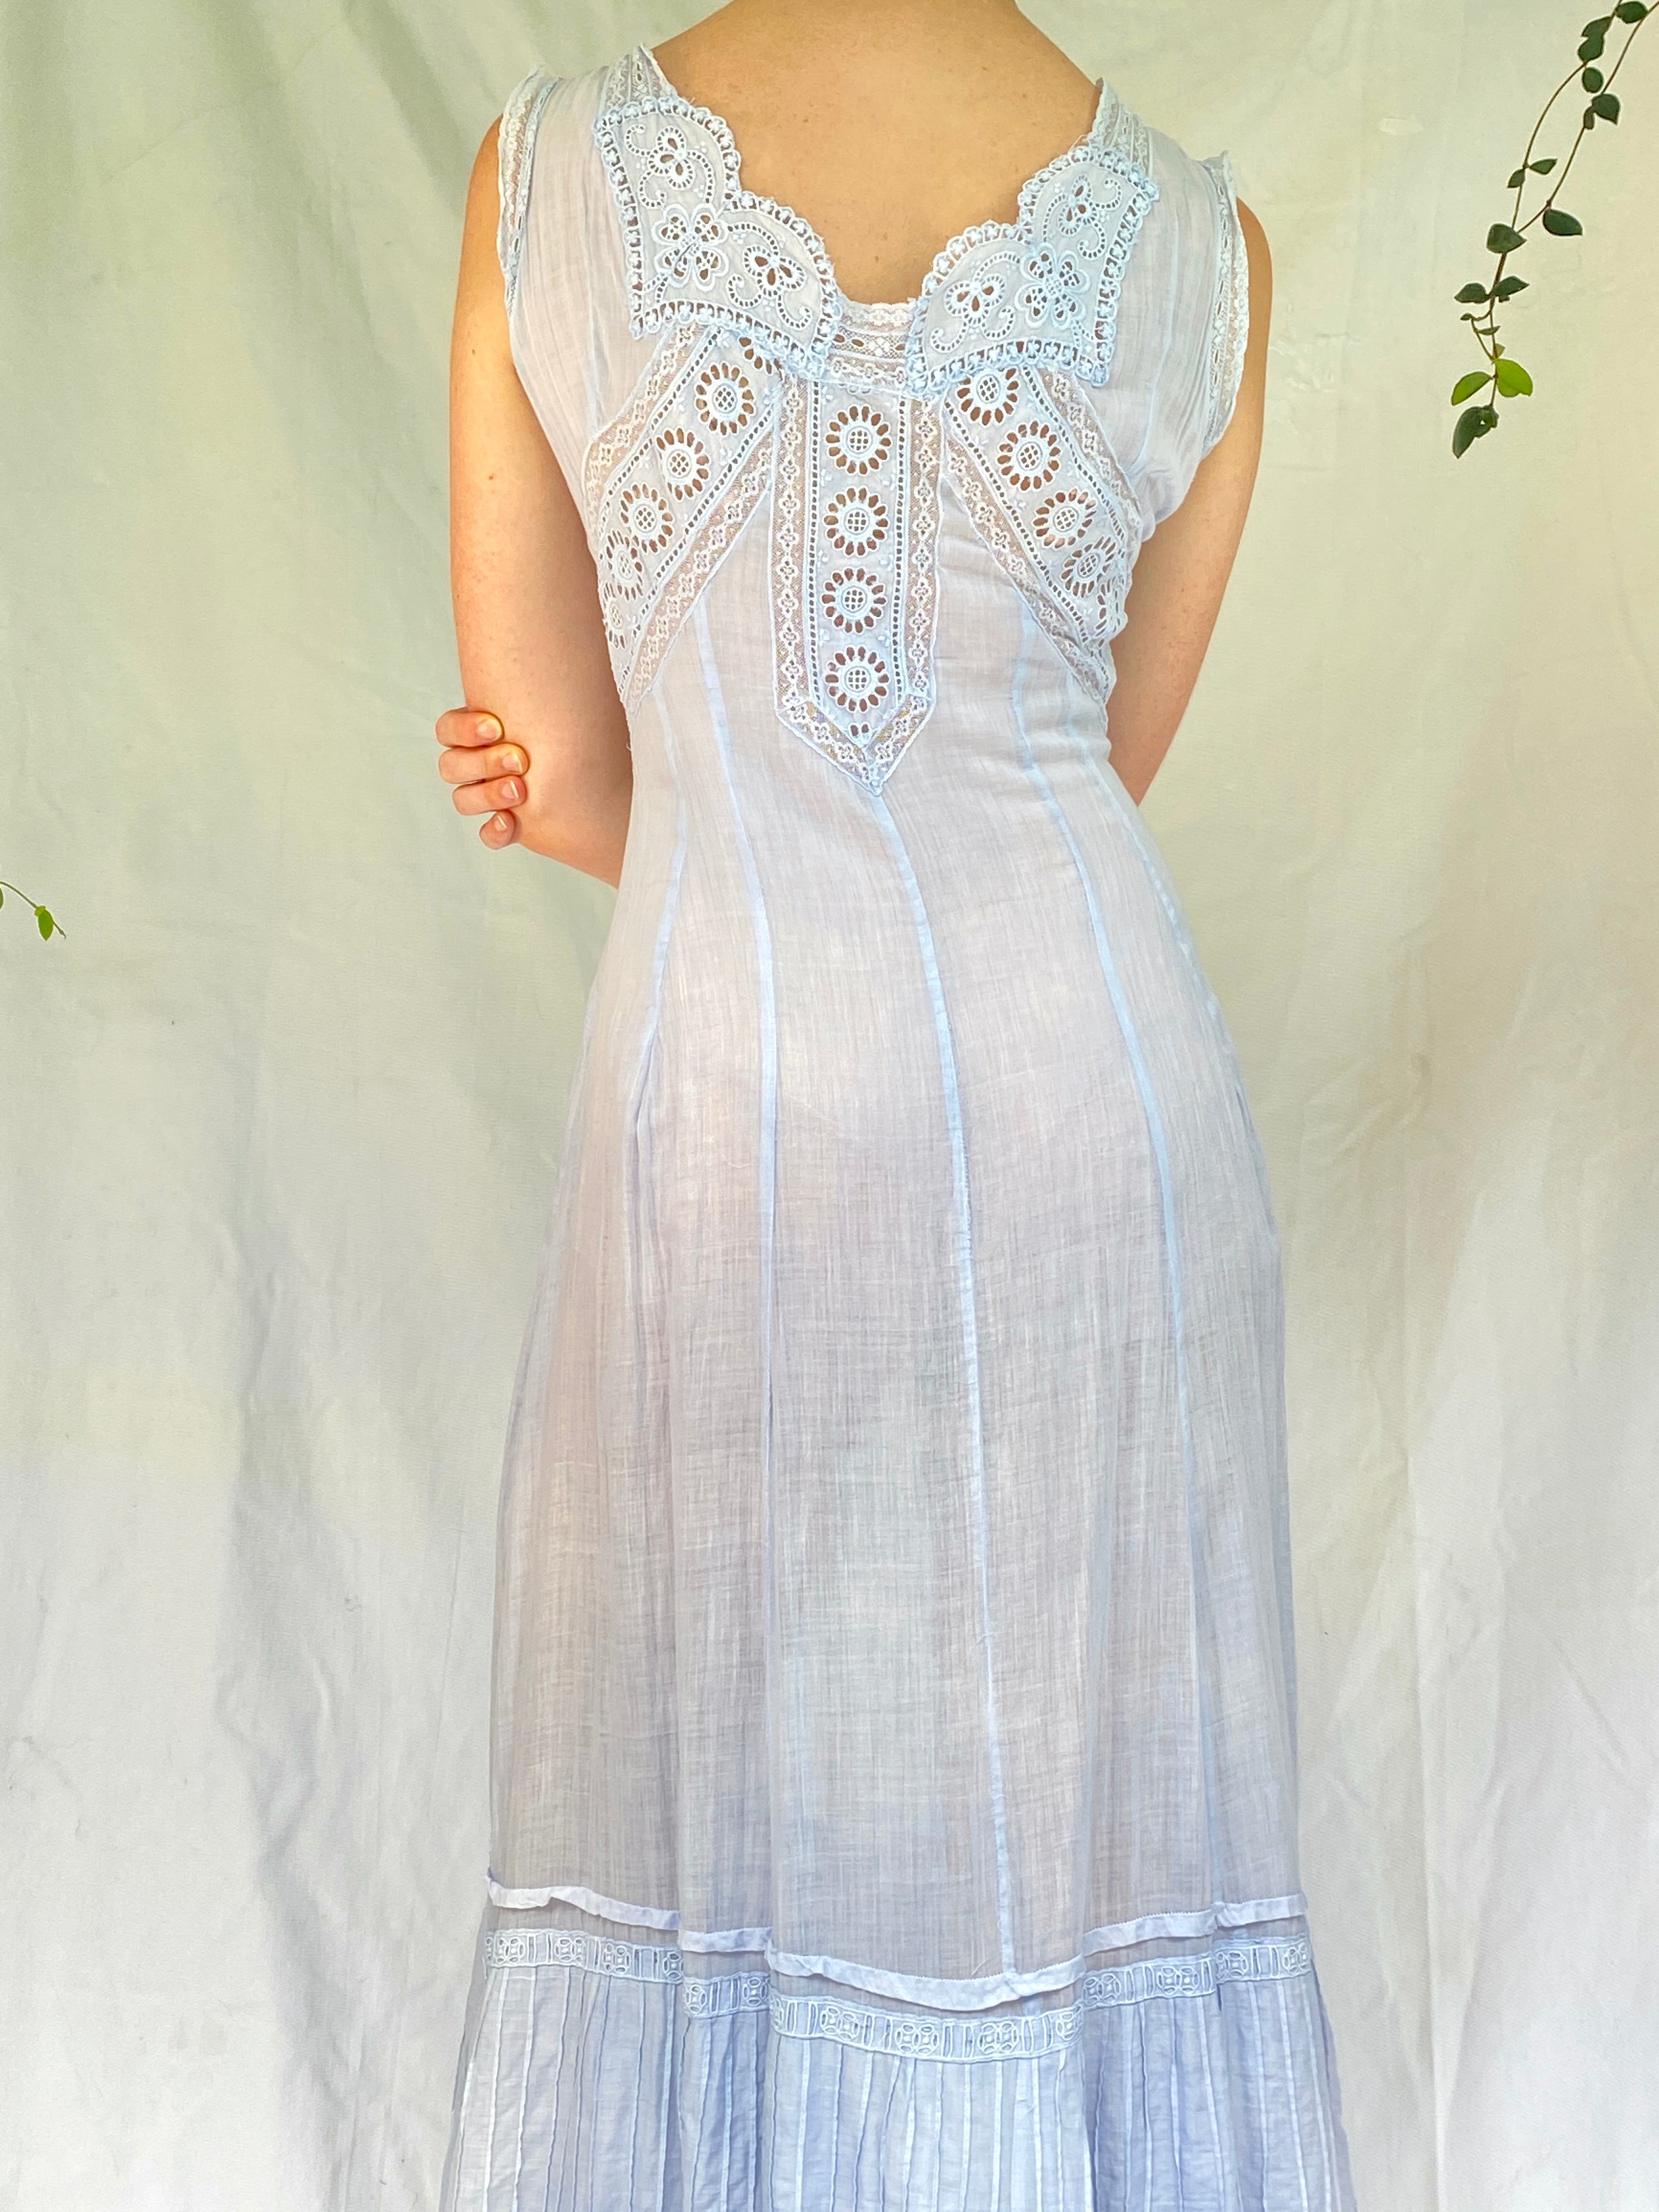 Hand Dyed Sky Blue Victorian Dress